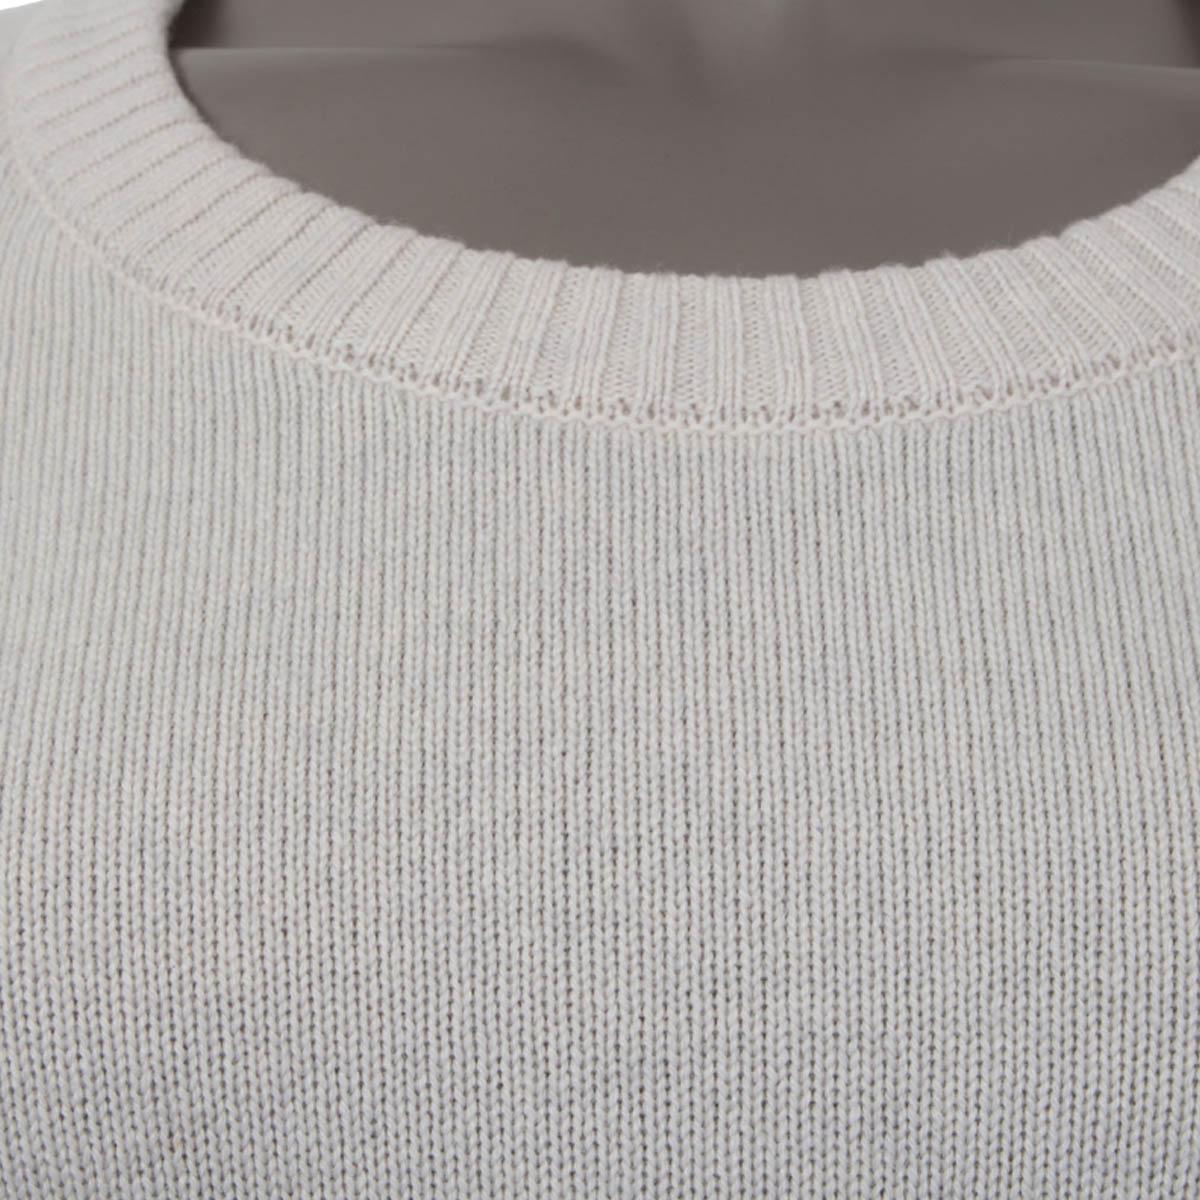 HERMES light grey cashmere ROUND NECK Sweater 36 XS For Sale 2